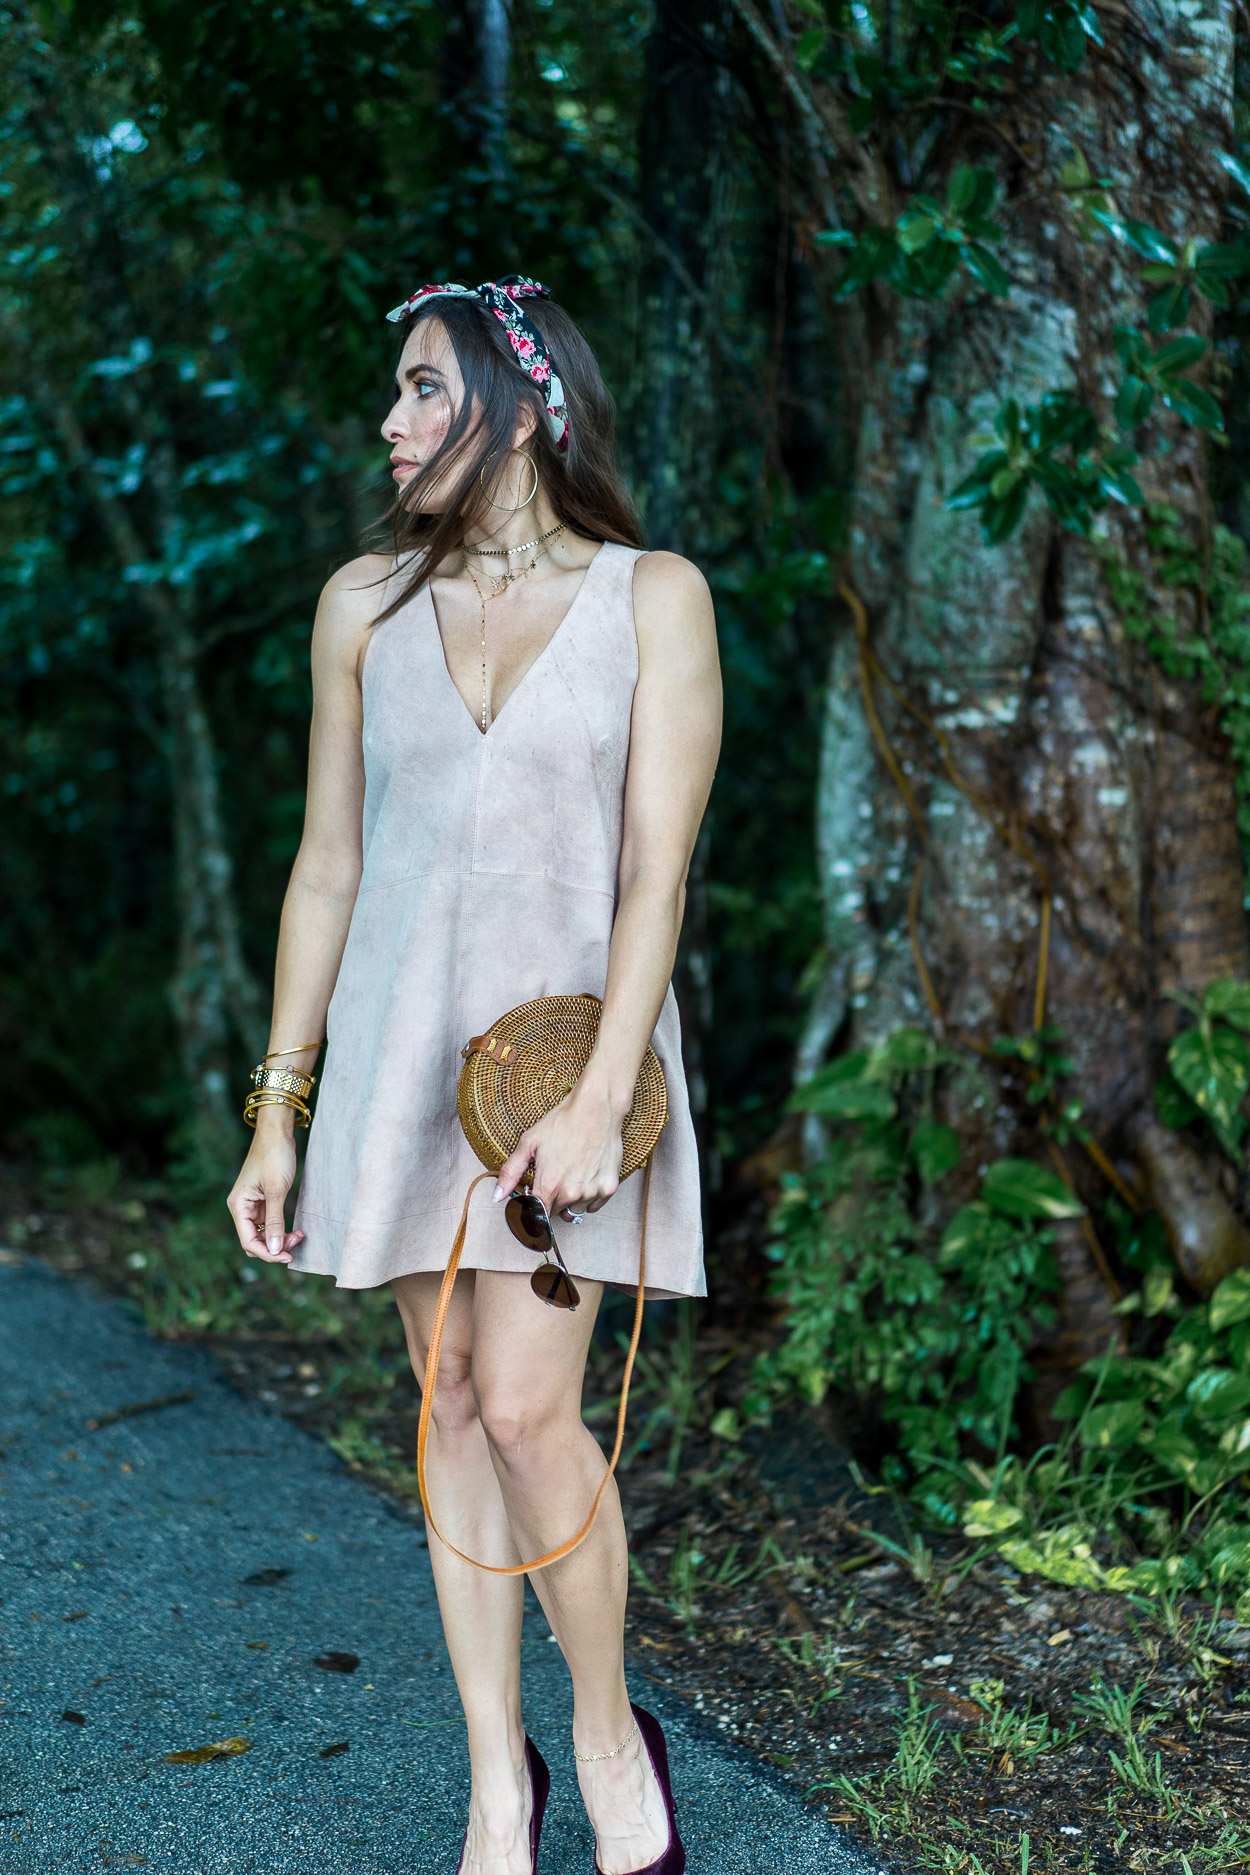 Summer boho glam in Free People retro love suede dress and Summer must haves like a round basket bag and floral bandana styled by Amanda of A Glam LIfestyle